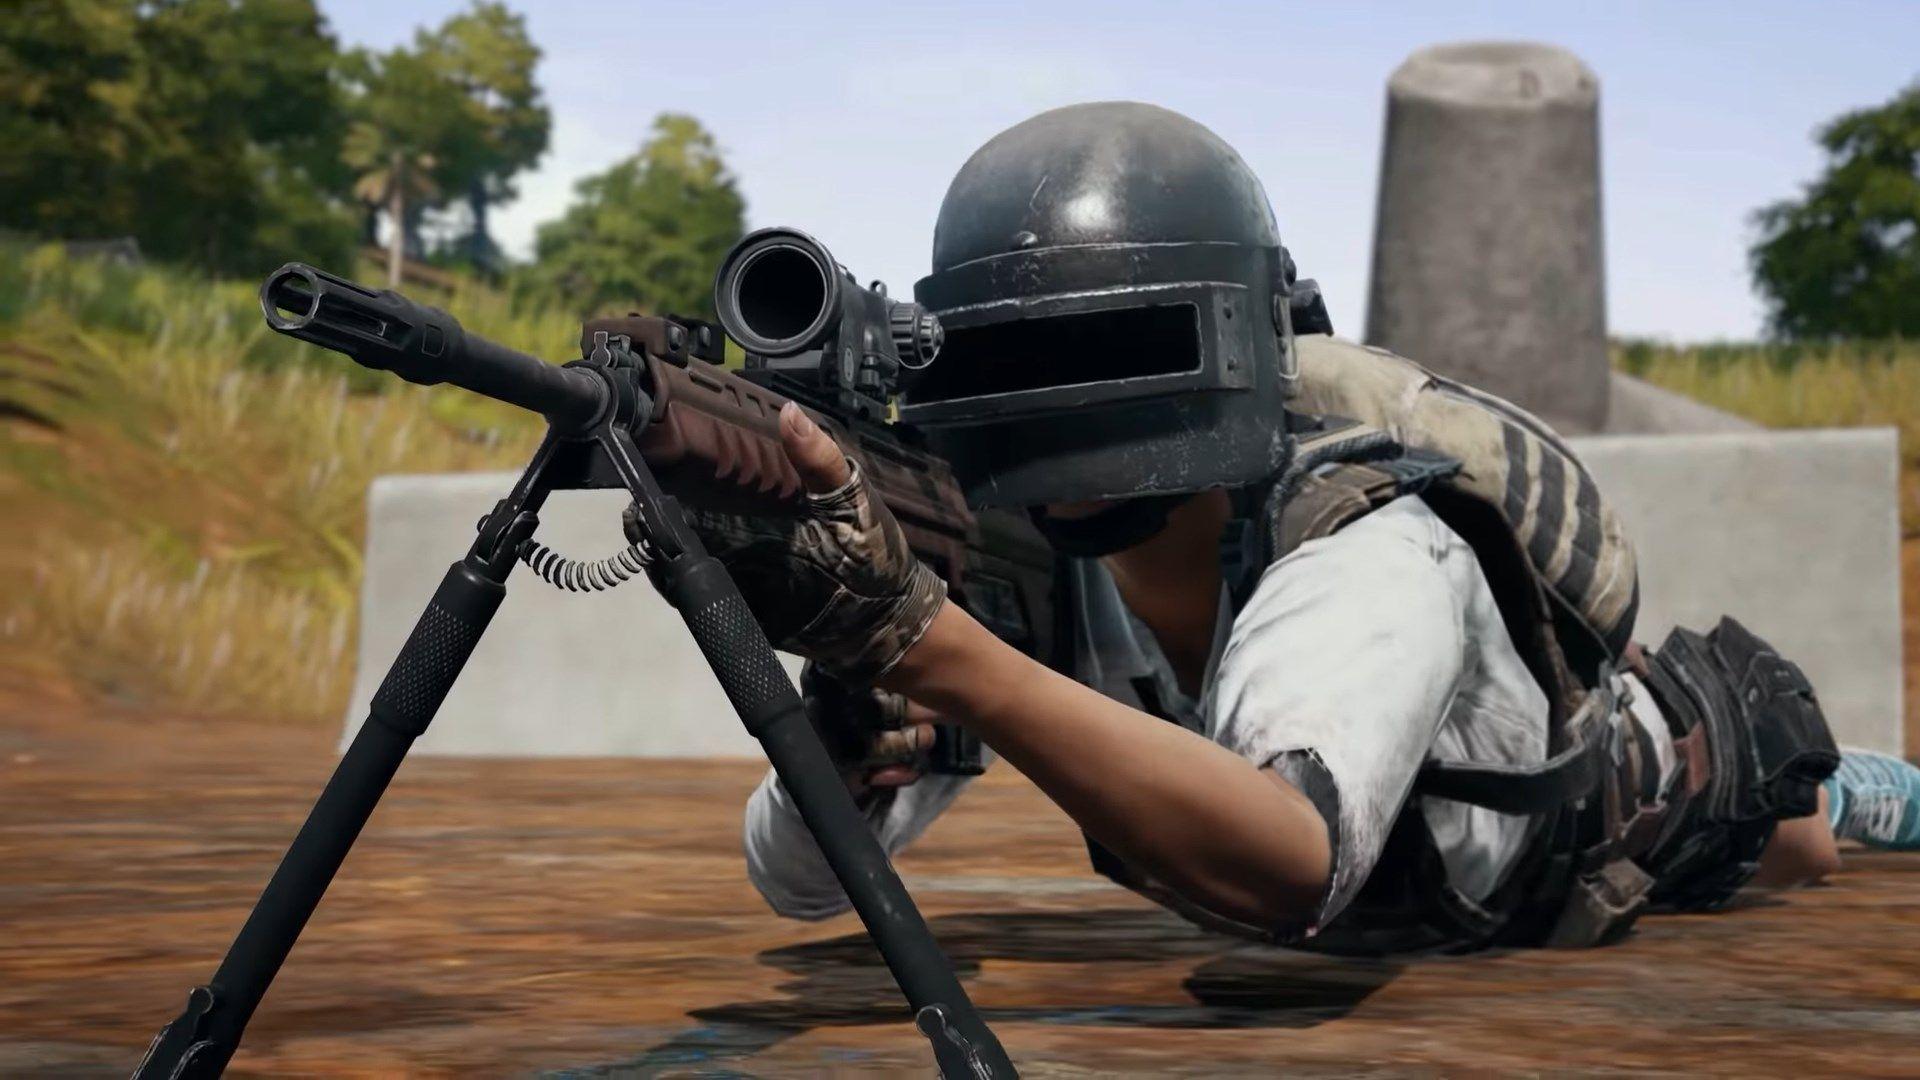 PUBG's Sanhok map is getting a new DMR and a new vehicle soon